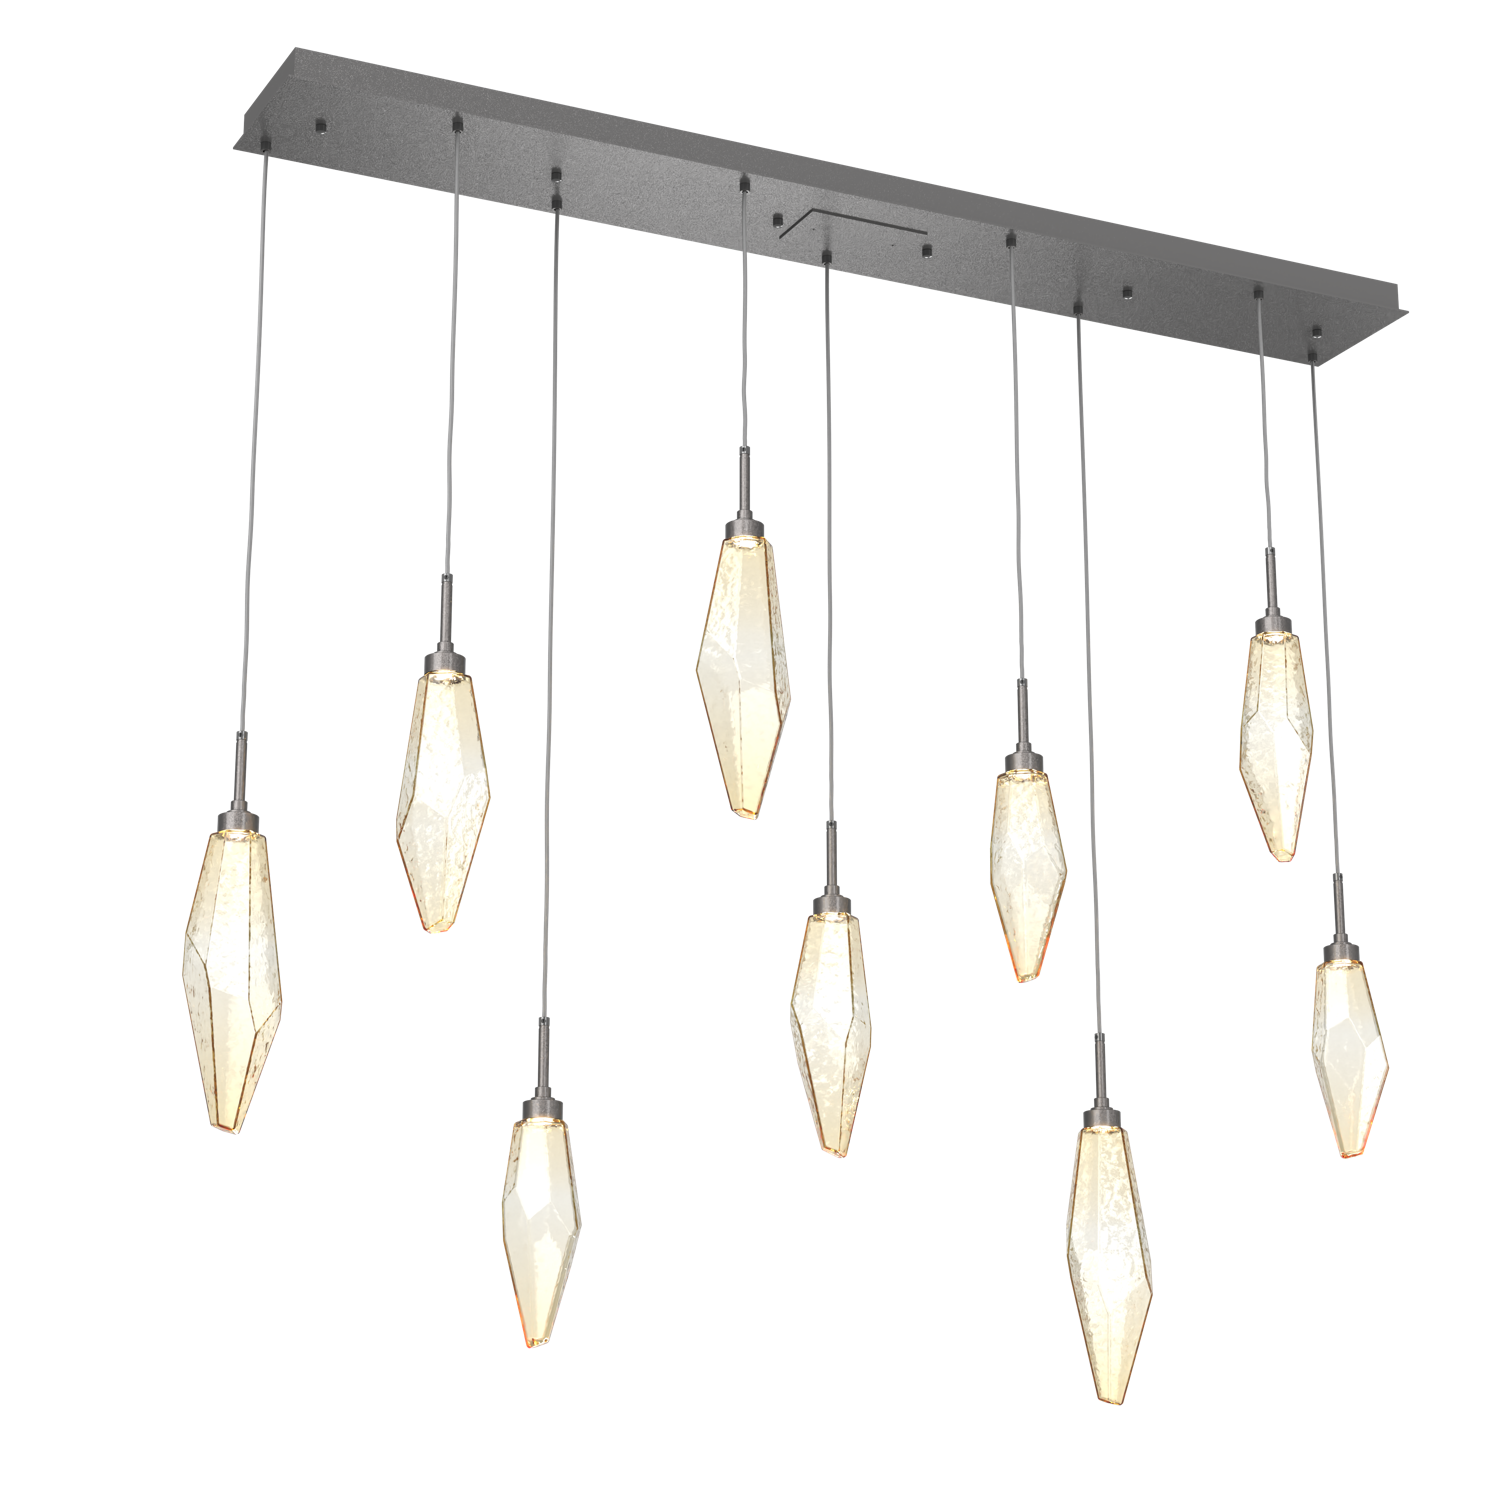 PLB0050-09-GP-CA-Hammerton-Studio-Rock-Crystal-9-light-linear-pendant-chandelier-with-graphite-finish-and-chilled-amber-blown-glass-shades-and-LED-lamping